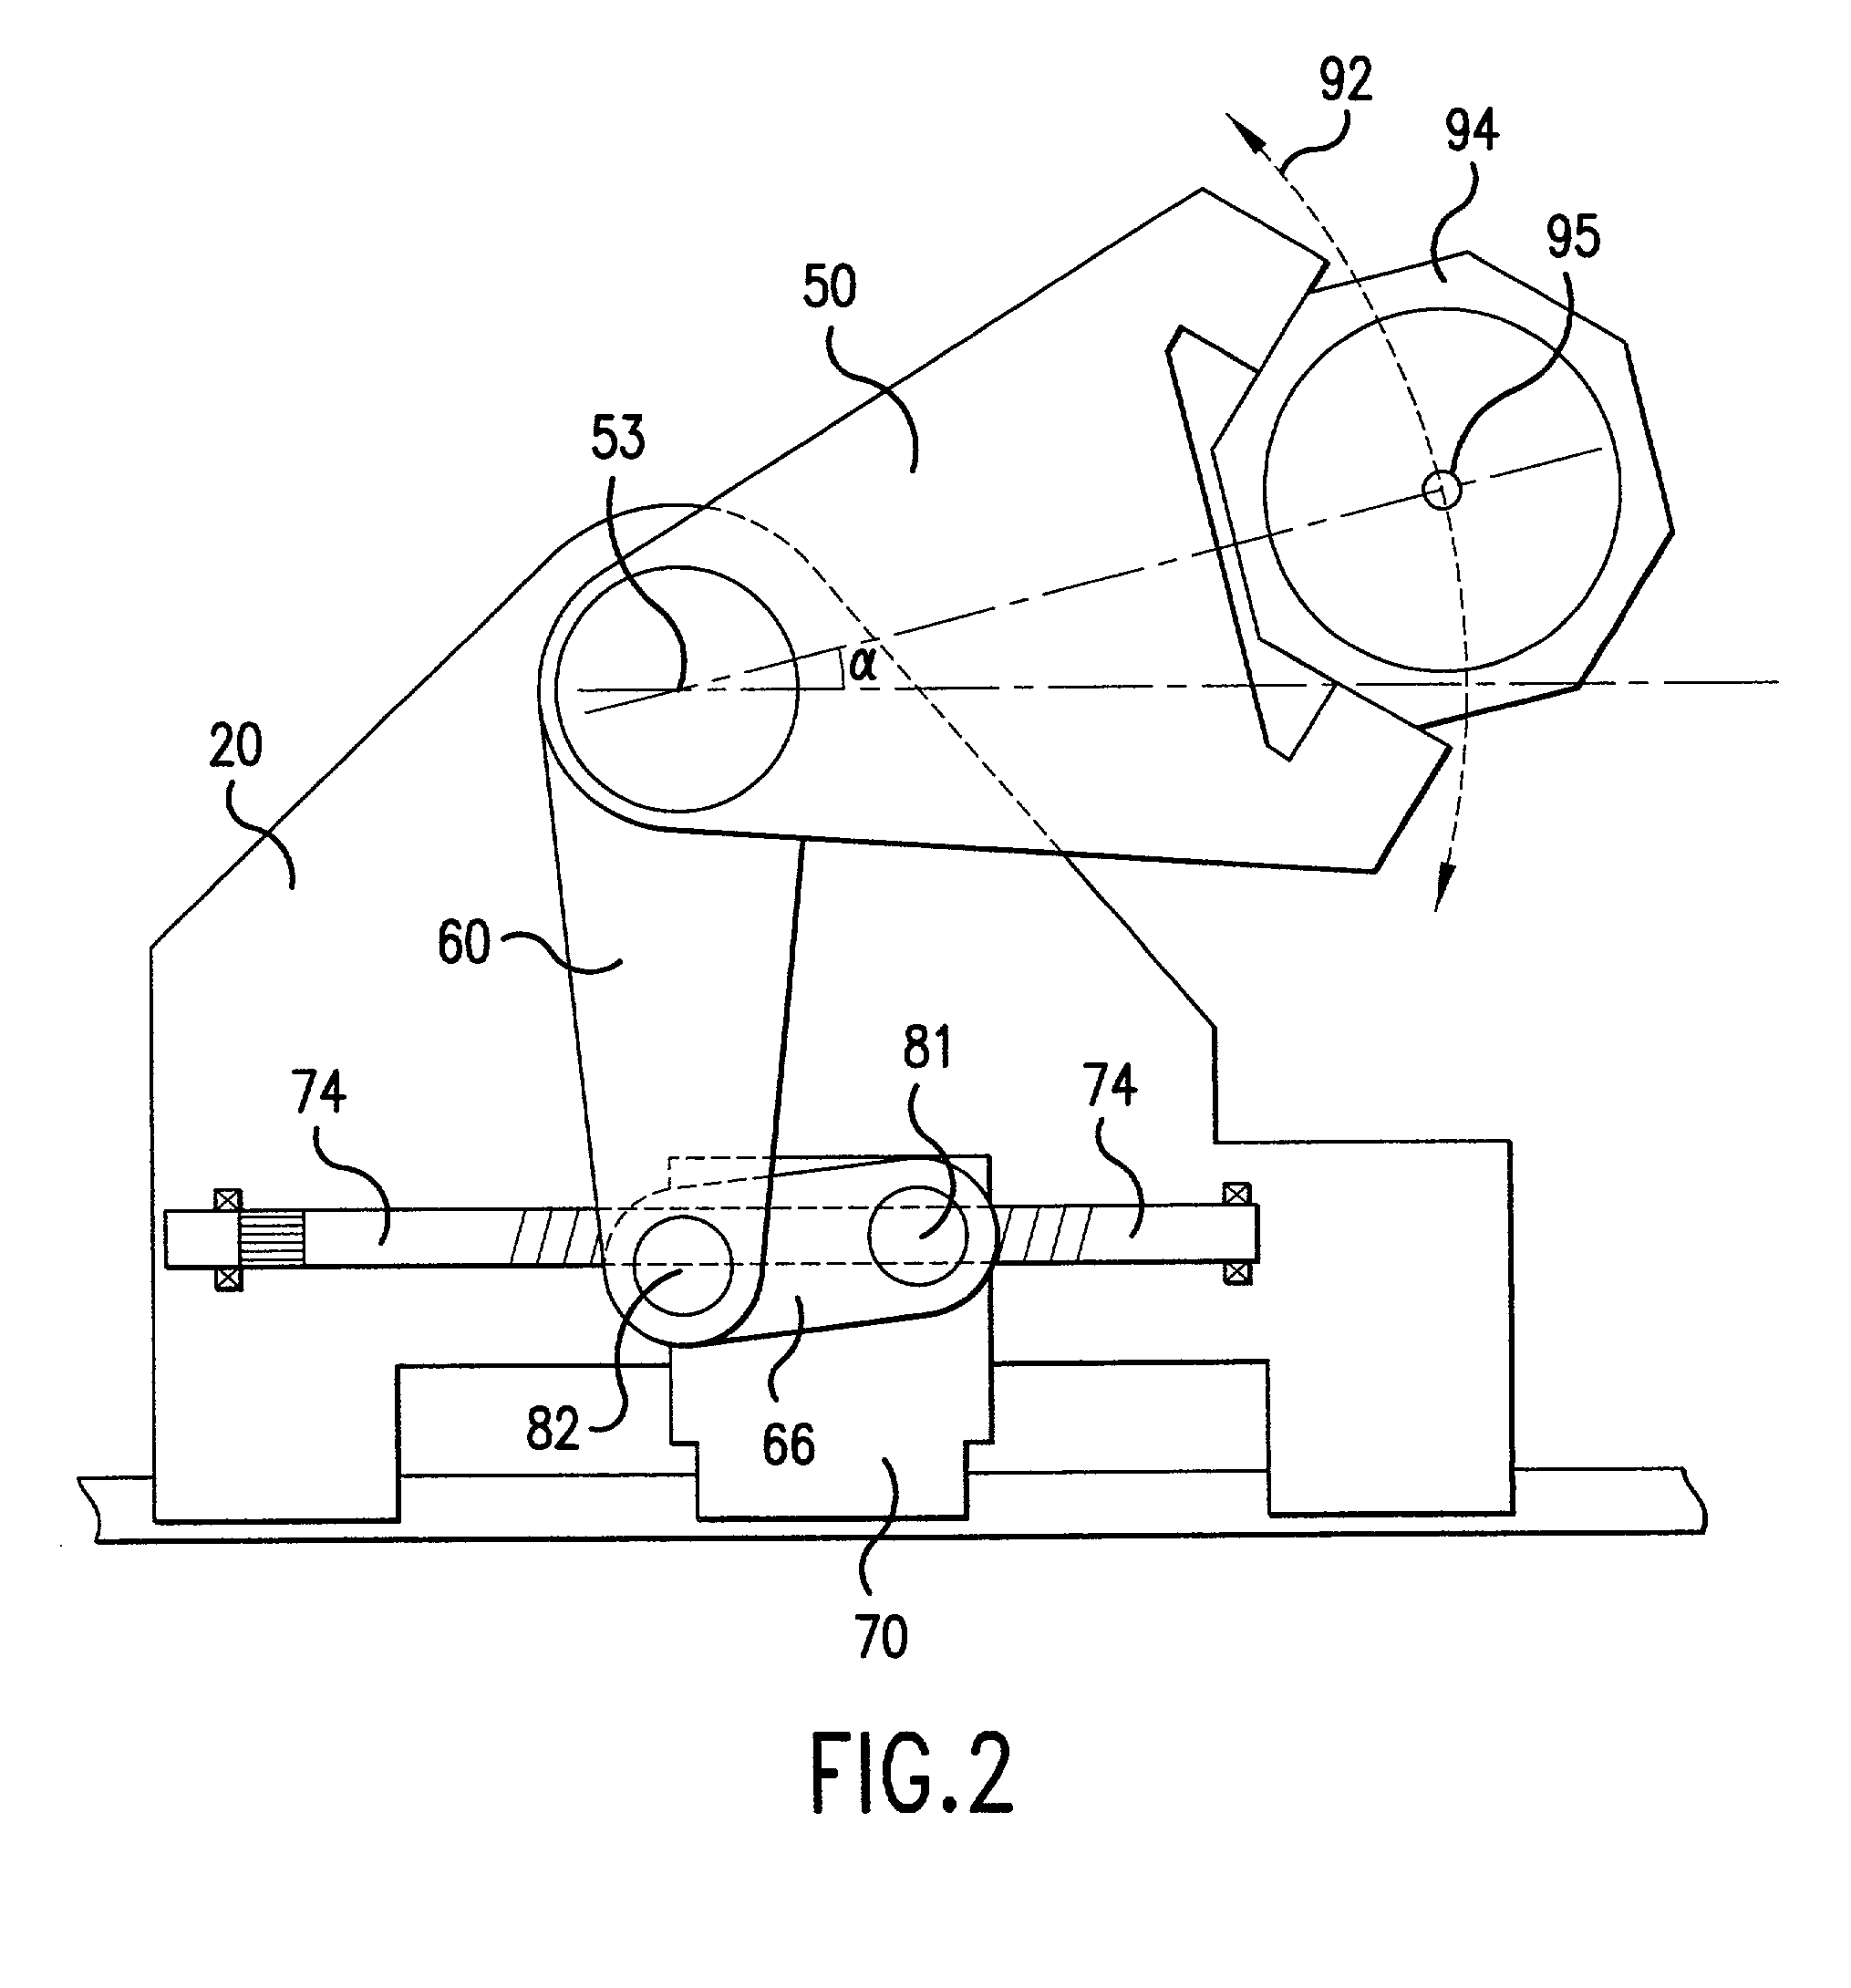 Device for producing relative motion with two translational degrees of freedom